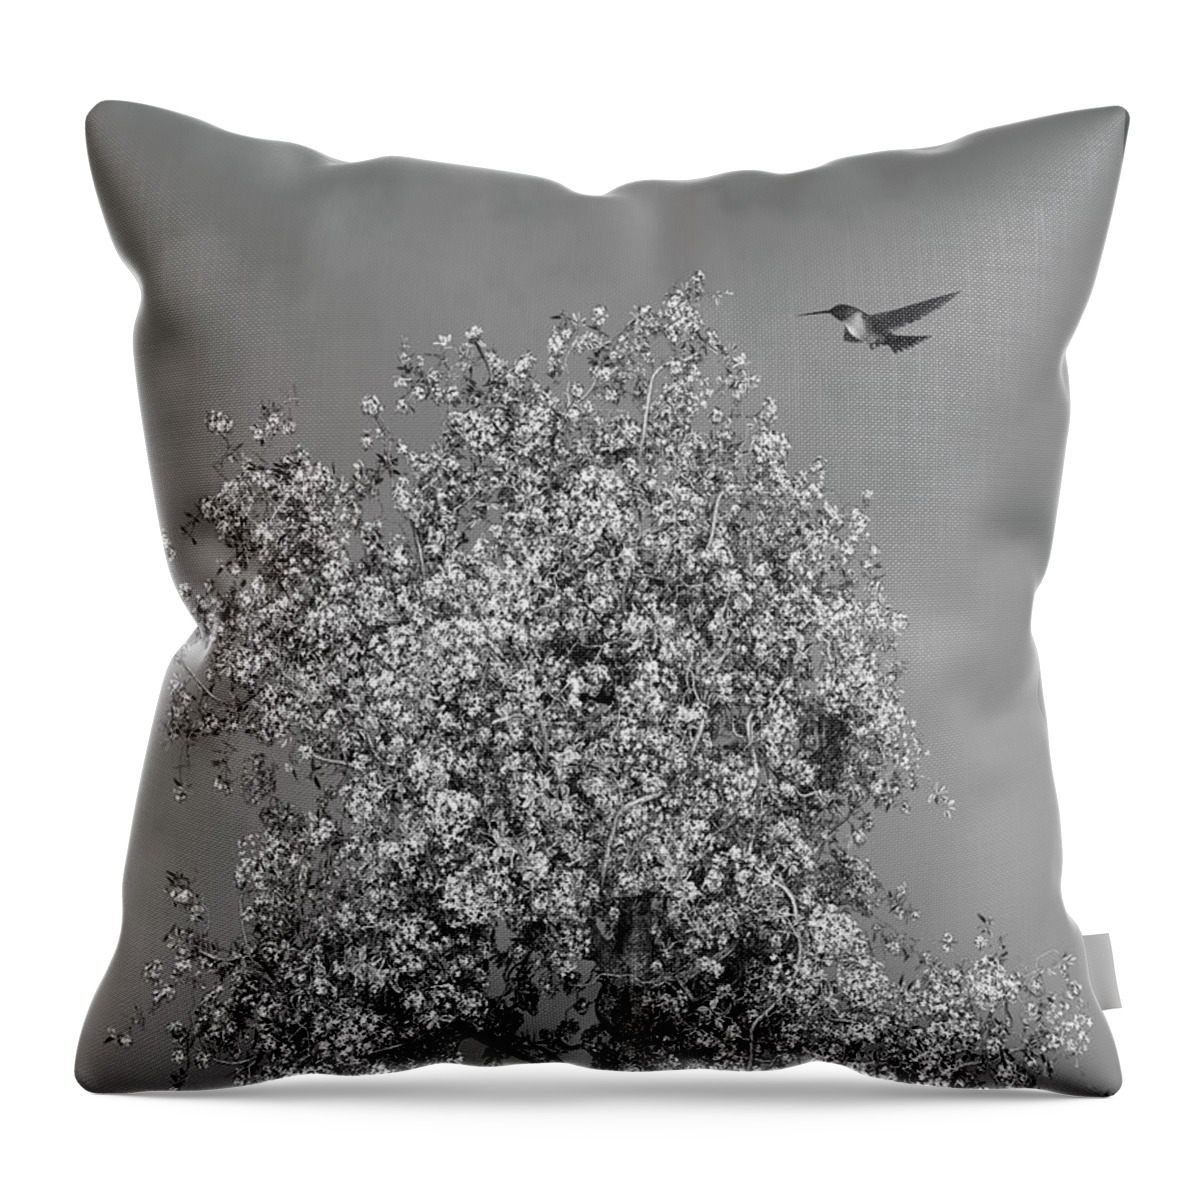 Hummingbird Throw Pillow featuring the mixed media Hummingbird At The Flowering Tree Black and White by David Dehner